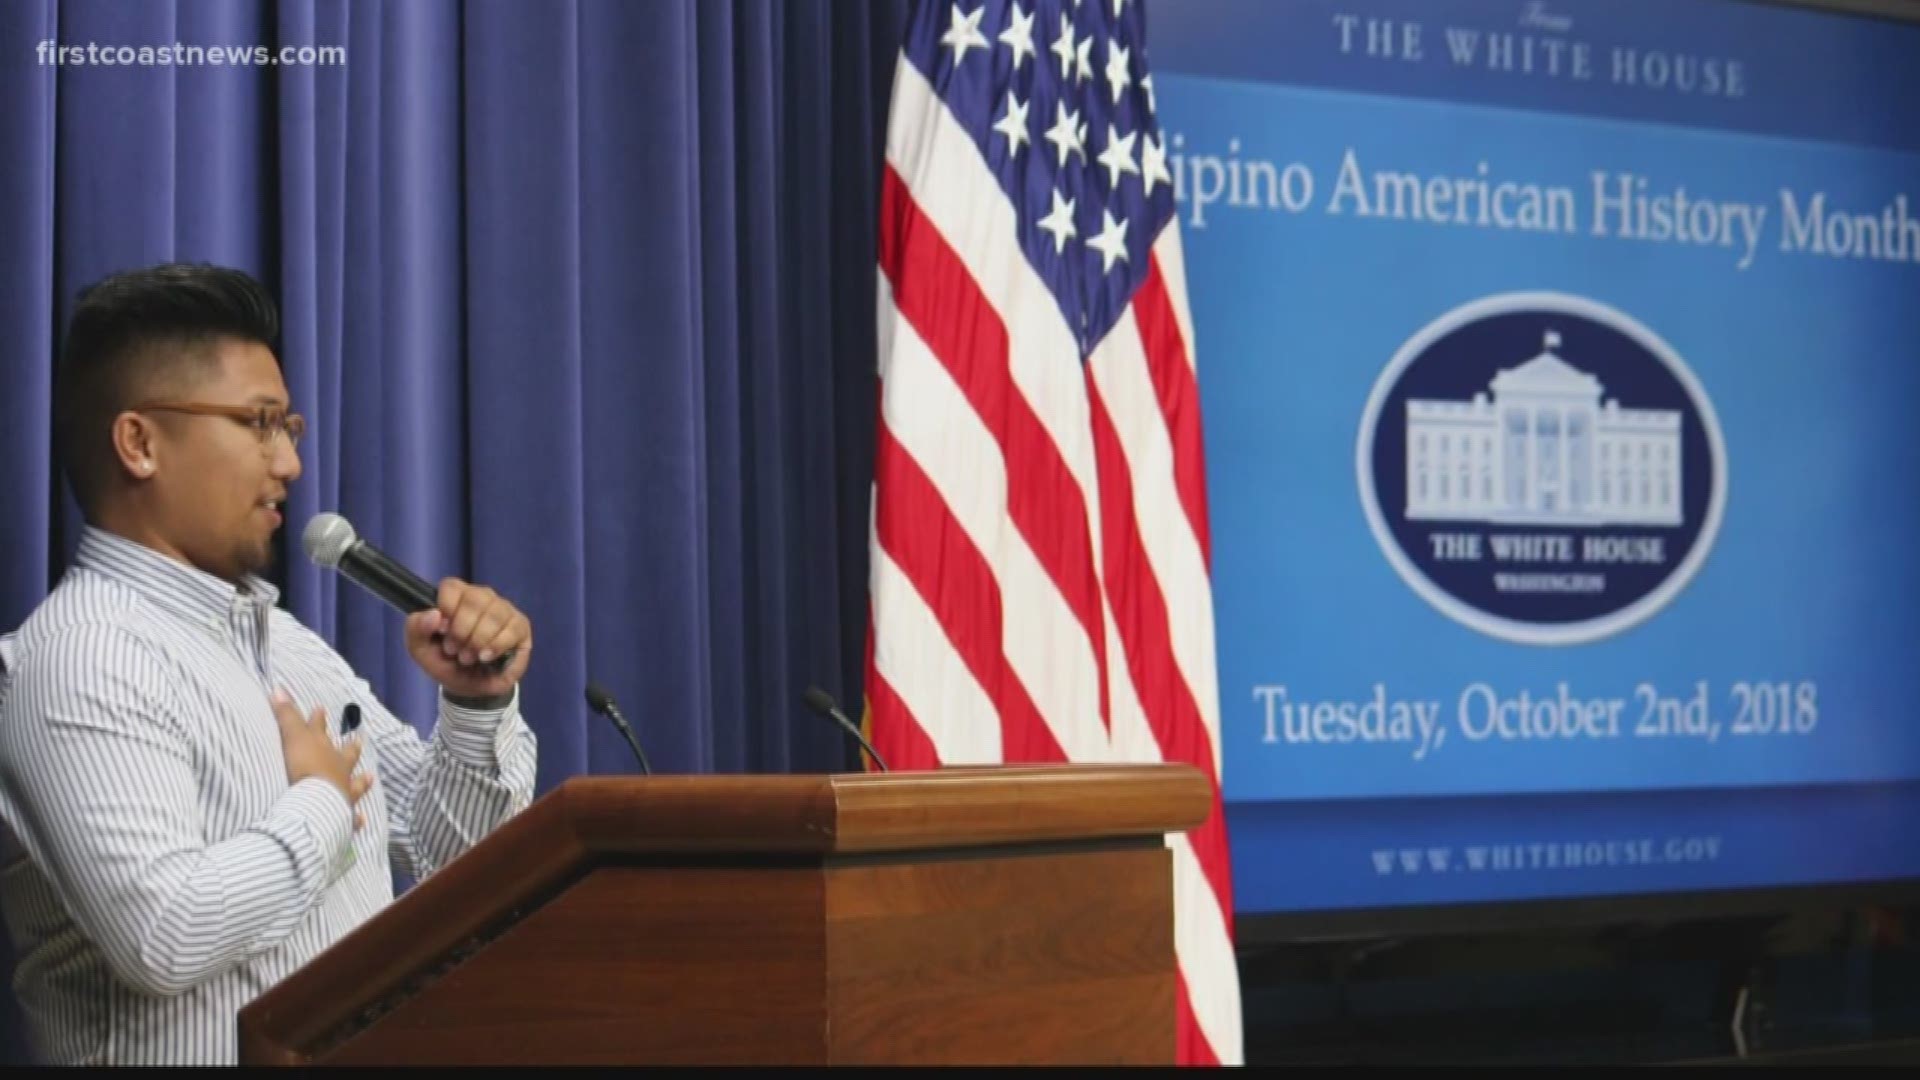 Janreii Villavcencio was invited to the White House to sing the National Anthem at the White House for Filipino American History Month.